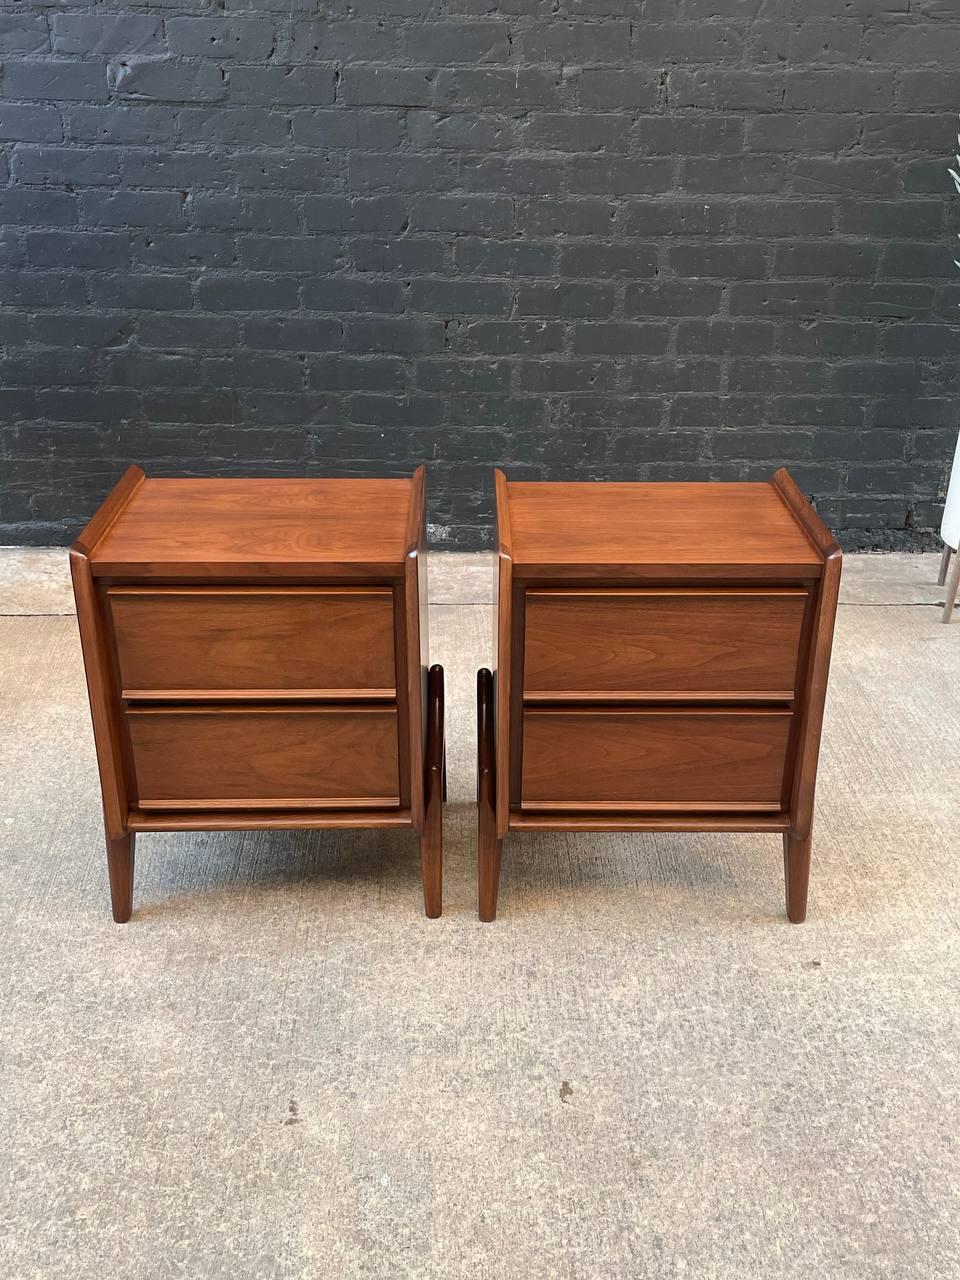 Mid-20th Century Newly Refinished - Pair of Mid-Century Modern Sculpted Walnut Night Stands